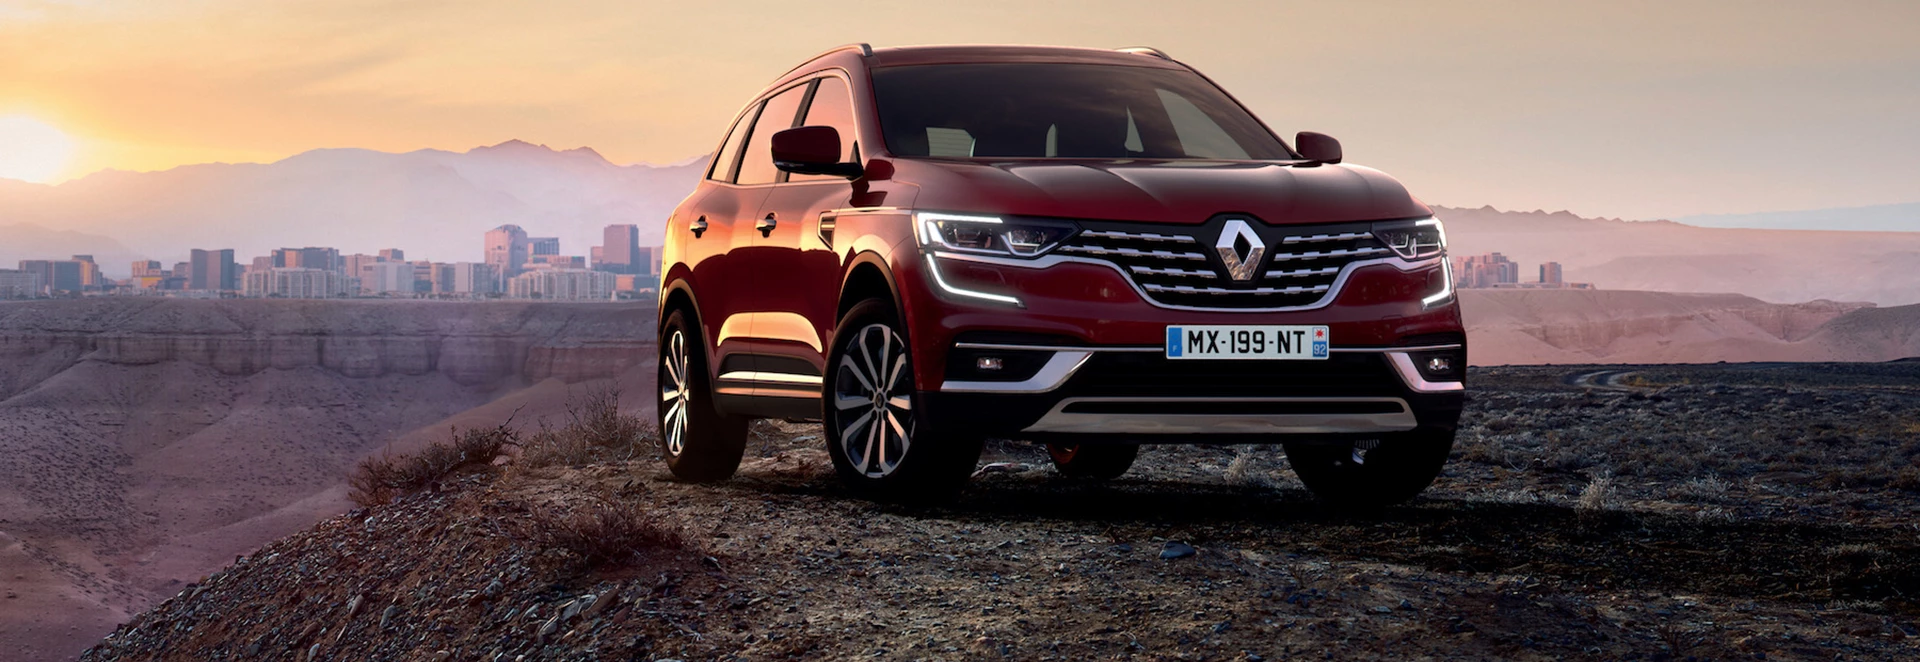 What’s new on the 2020 Renault Koleos?